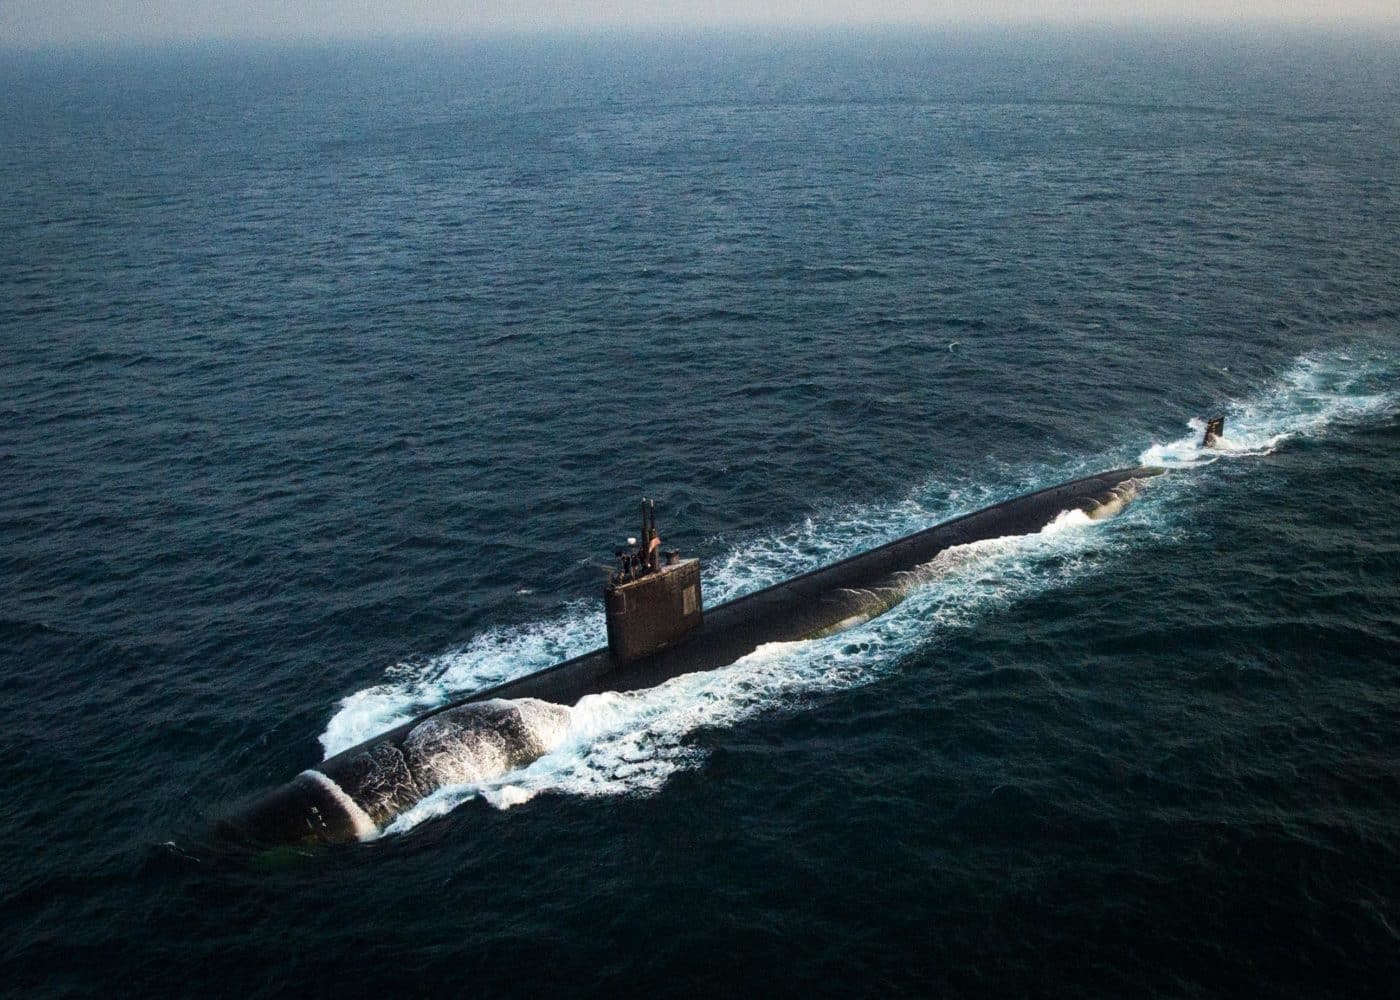 160121-N-CJ186-308
ARABIAN GULF (Jan. 21, 2016) The Los Angeles-class fast attack submarine USS Toledo (SSN 769), assigned to Commander, Task Force (CTF) 54, transits through the Arabian Gulf. CTF 54 commands operations of U.S. submarine forces (SSN/SGN) and coordinates theater-wide anti-submarine warfare matters in the U.S. 5th Fleet area of operations. (U.S. Navy Combat Camera photo by Mass Communication Specialist 2nd Class Torrey W. Lee/Released)